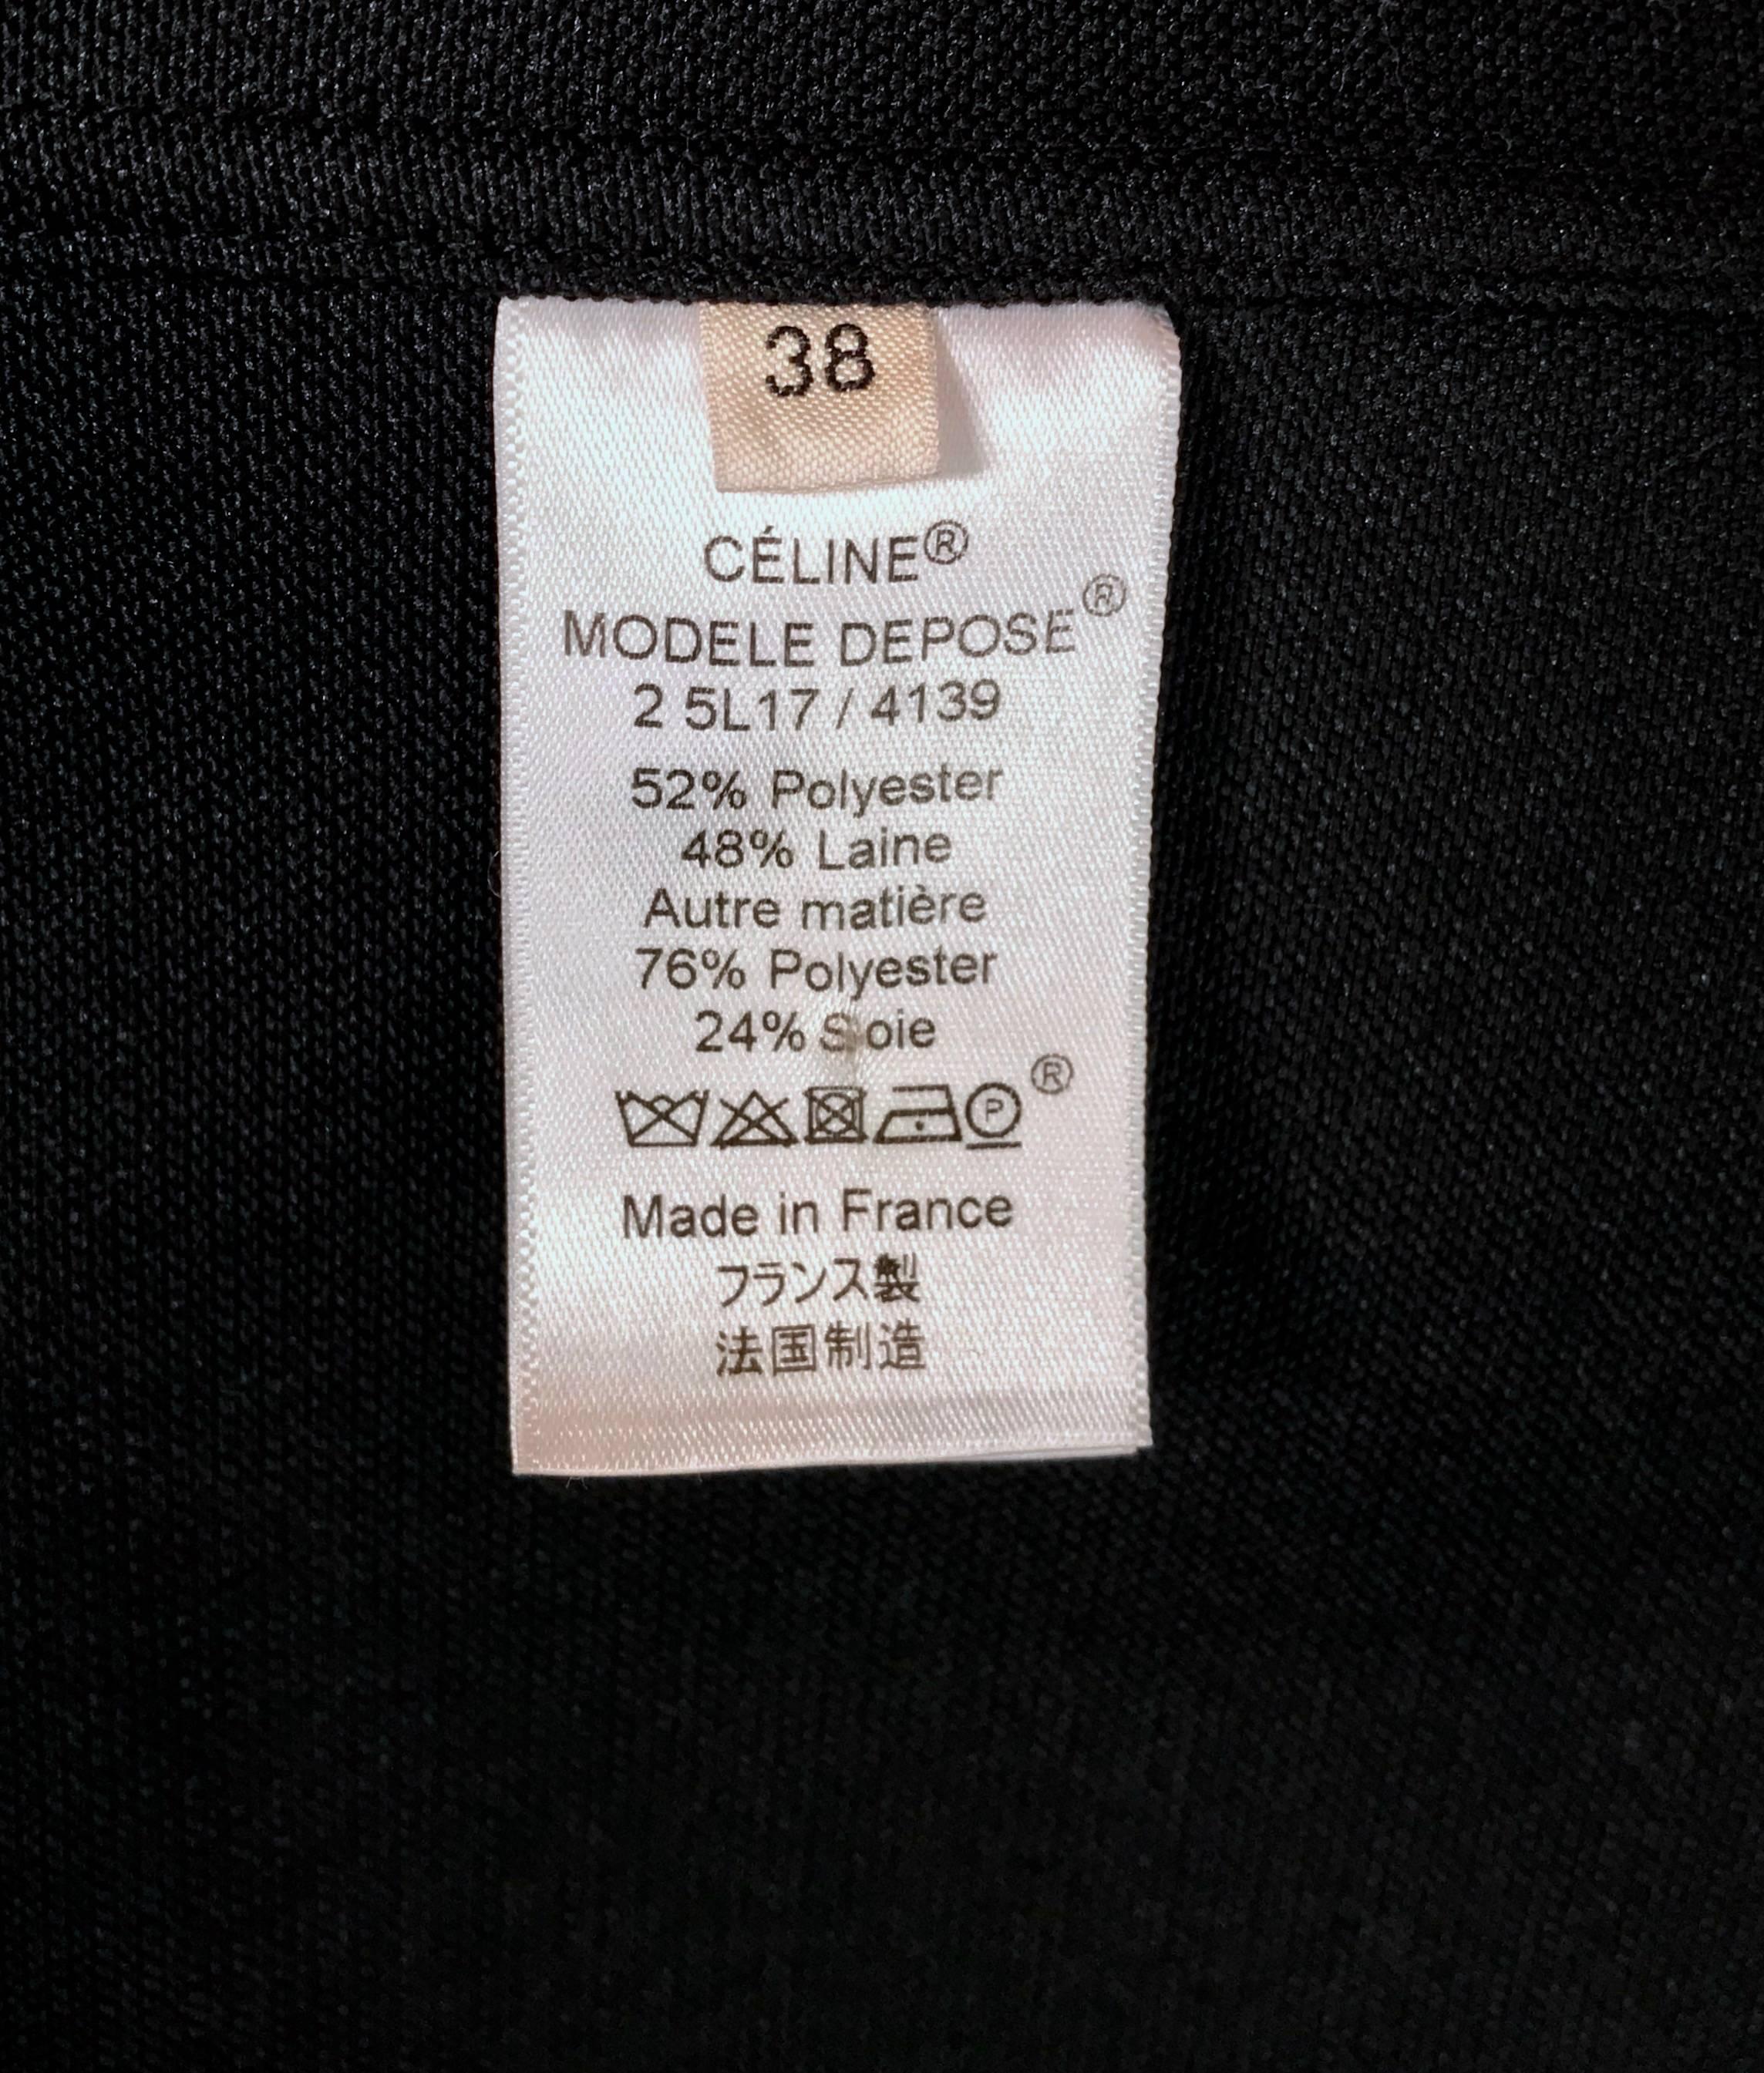 CELINE by PHOEBE PHILO black hooded jacket with satin accents In Excellent Condition In San Fransisco, CA